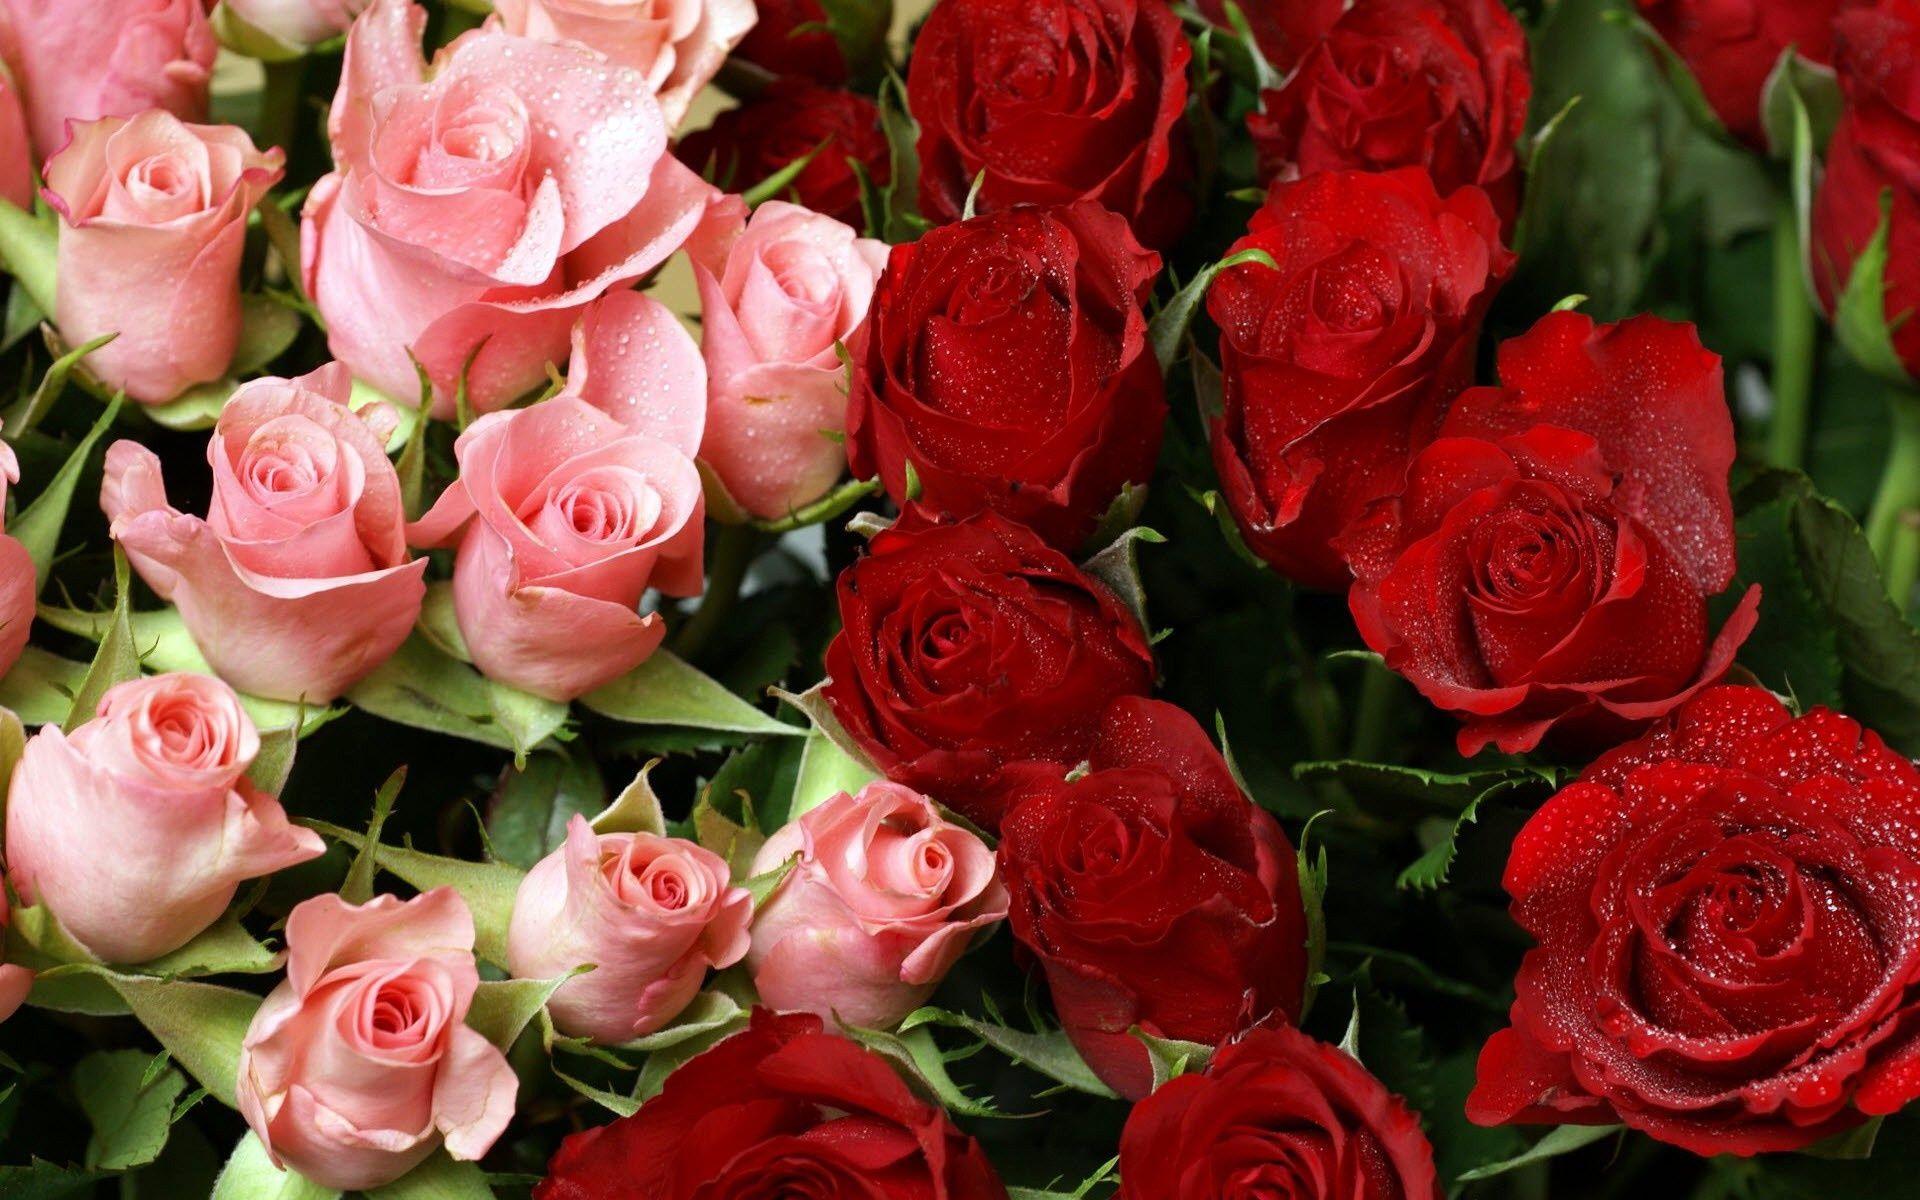 Pink & Red Roses Bouquet Wallpaper in jpg format for free download